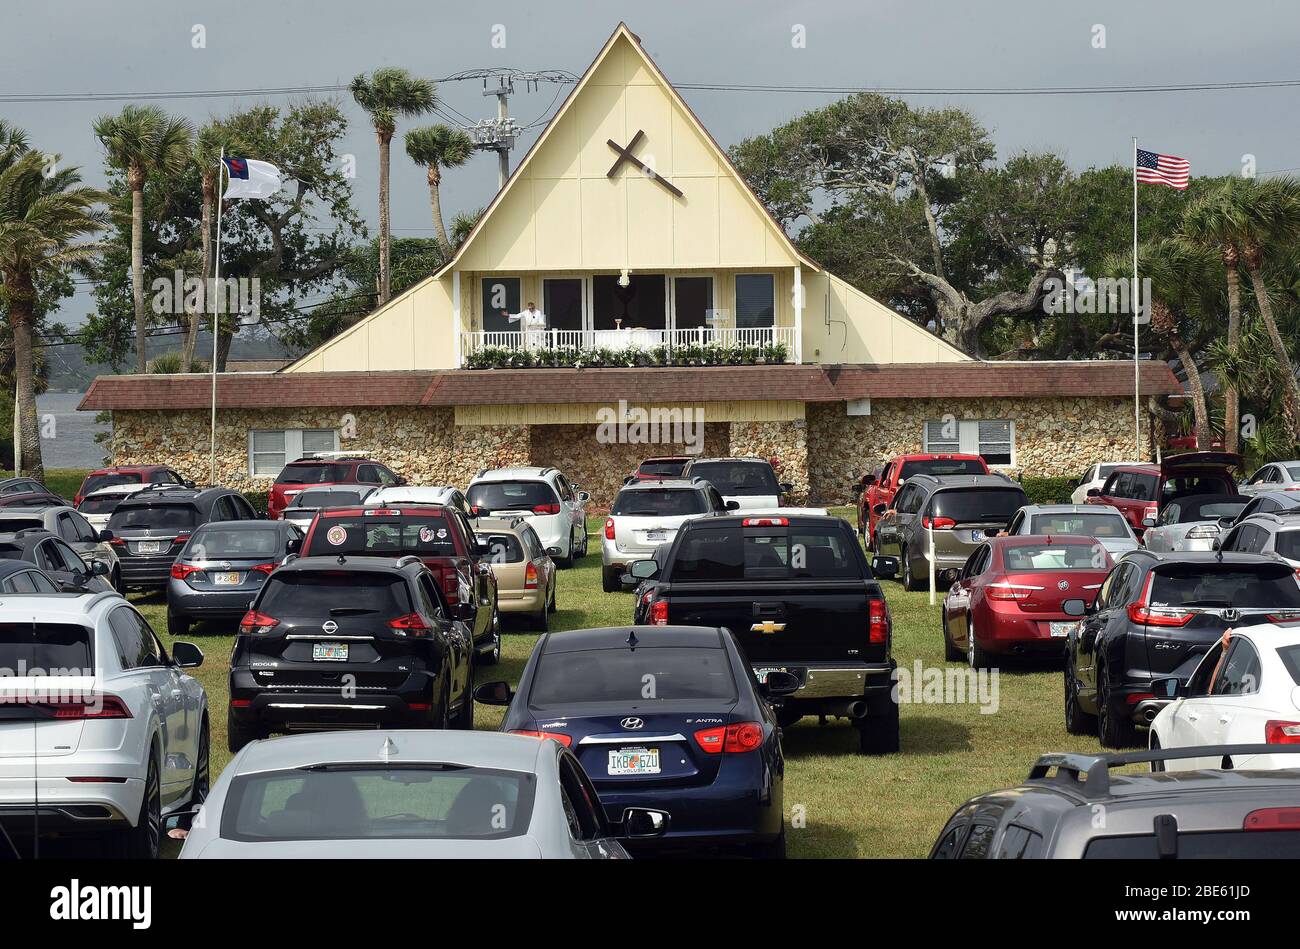 April 12, 2020 - Daytona Beach Shores, Florida, United States - People in cars attend Easter Sunday services at the Daytona Beach Drive-in Christian Church as a way to practice social distancing during the coronavirus pandemic on April 12, 2020 in Daytona Beach Shores, Florida. Florida's stay-at- home order exempts religious services, but Governor Ron DeSantis has advised against attending crowded religious gatherings. (Paul Hennessy/Alamy) Stock Photo